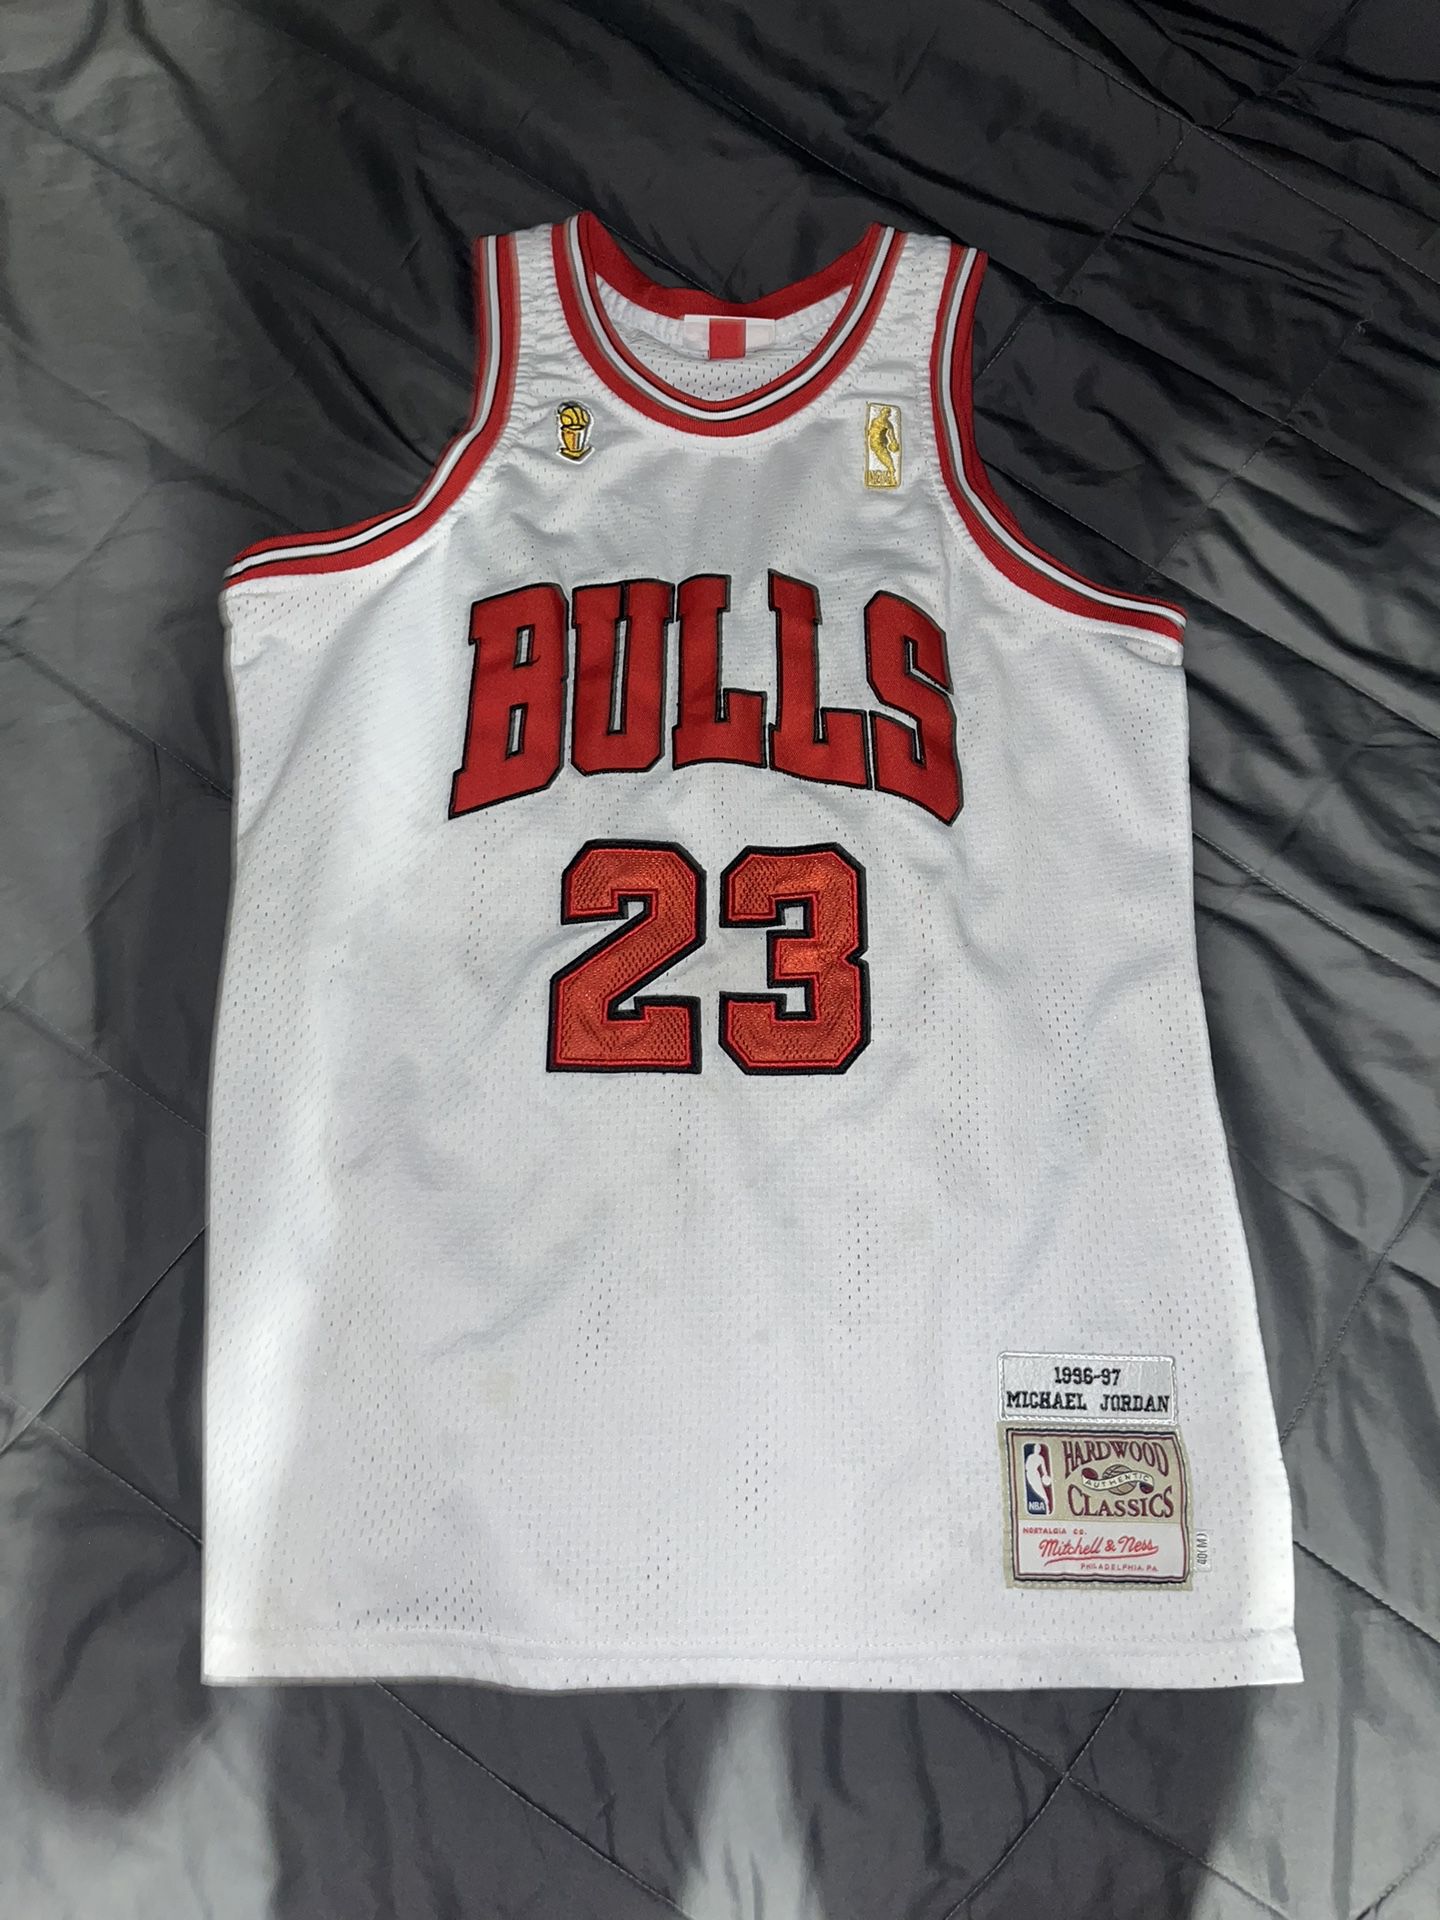 Micheal jordan jersey 1(contact info removed) vintage 